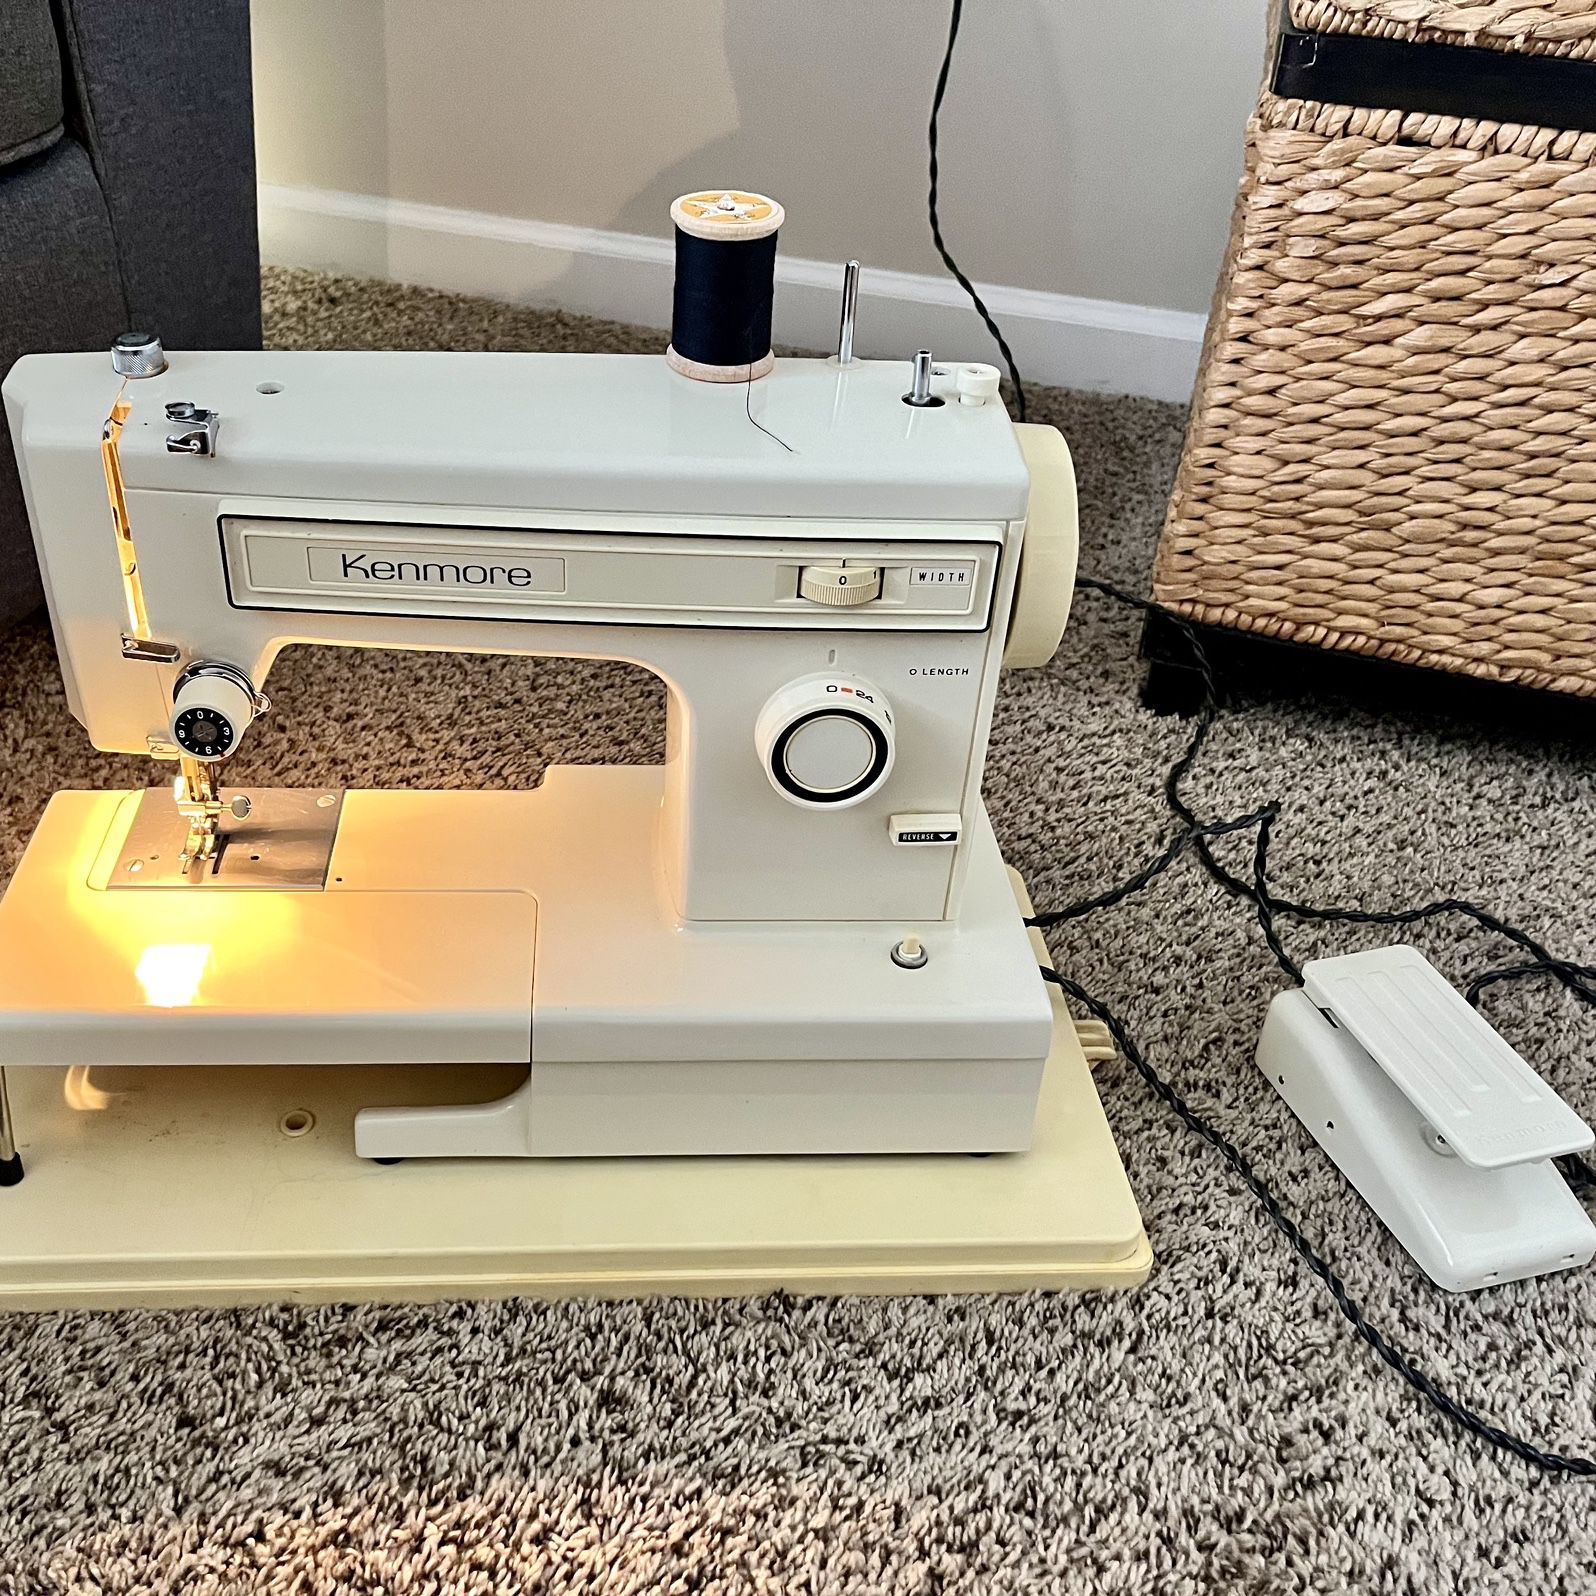 MINT CONDITION Kenmore Sewing Machine